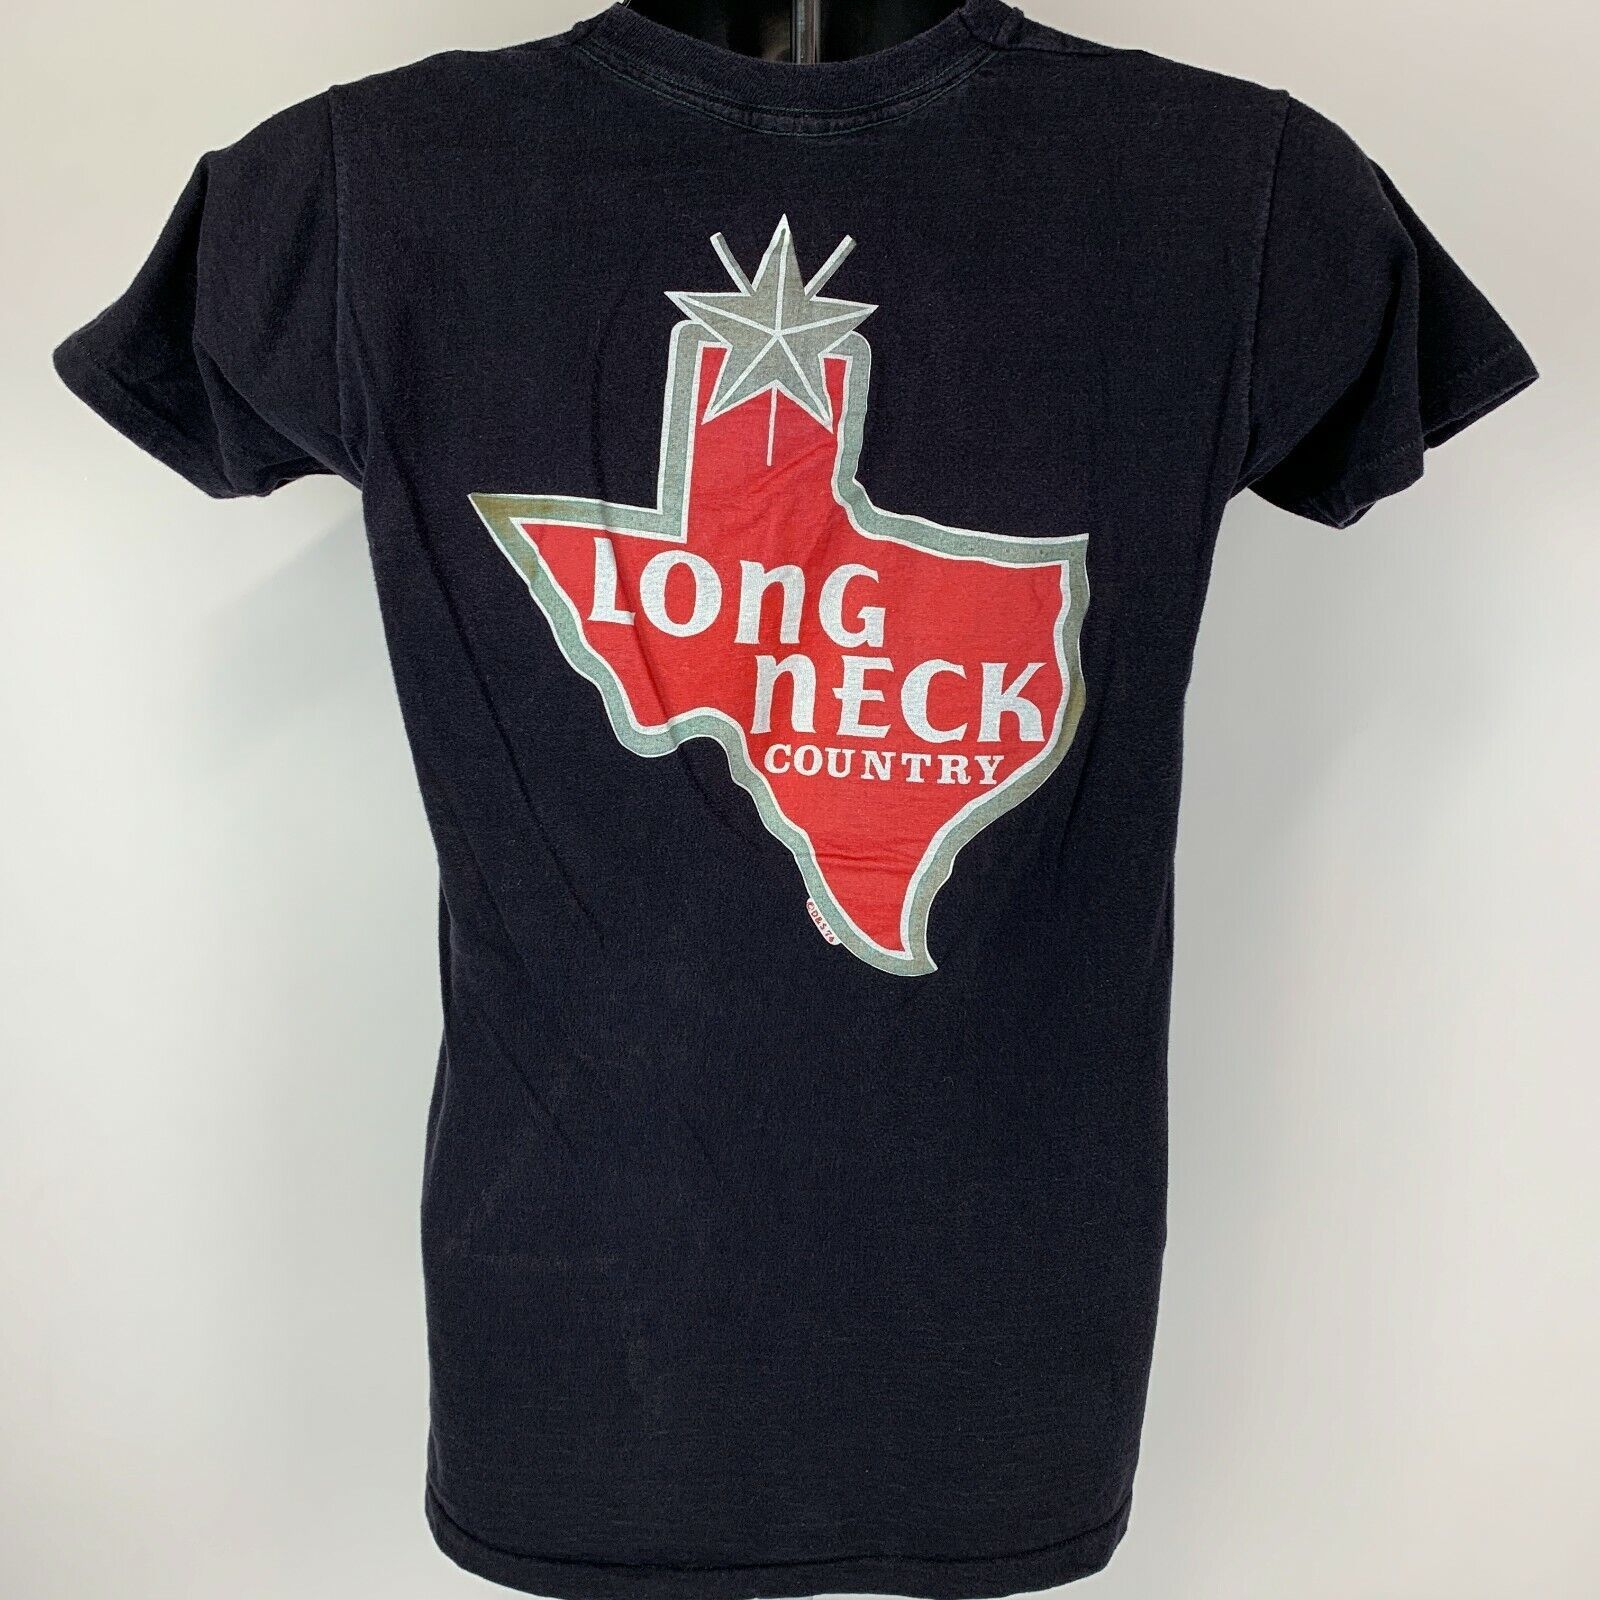 Vintage Willie Nelson Lone Star Beer Vintage 70s T Shirt Small 1974 Size US S / EU 44-46 / 1 - 3 Thumbnail